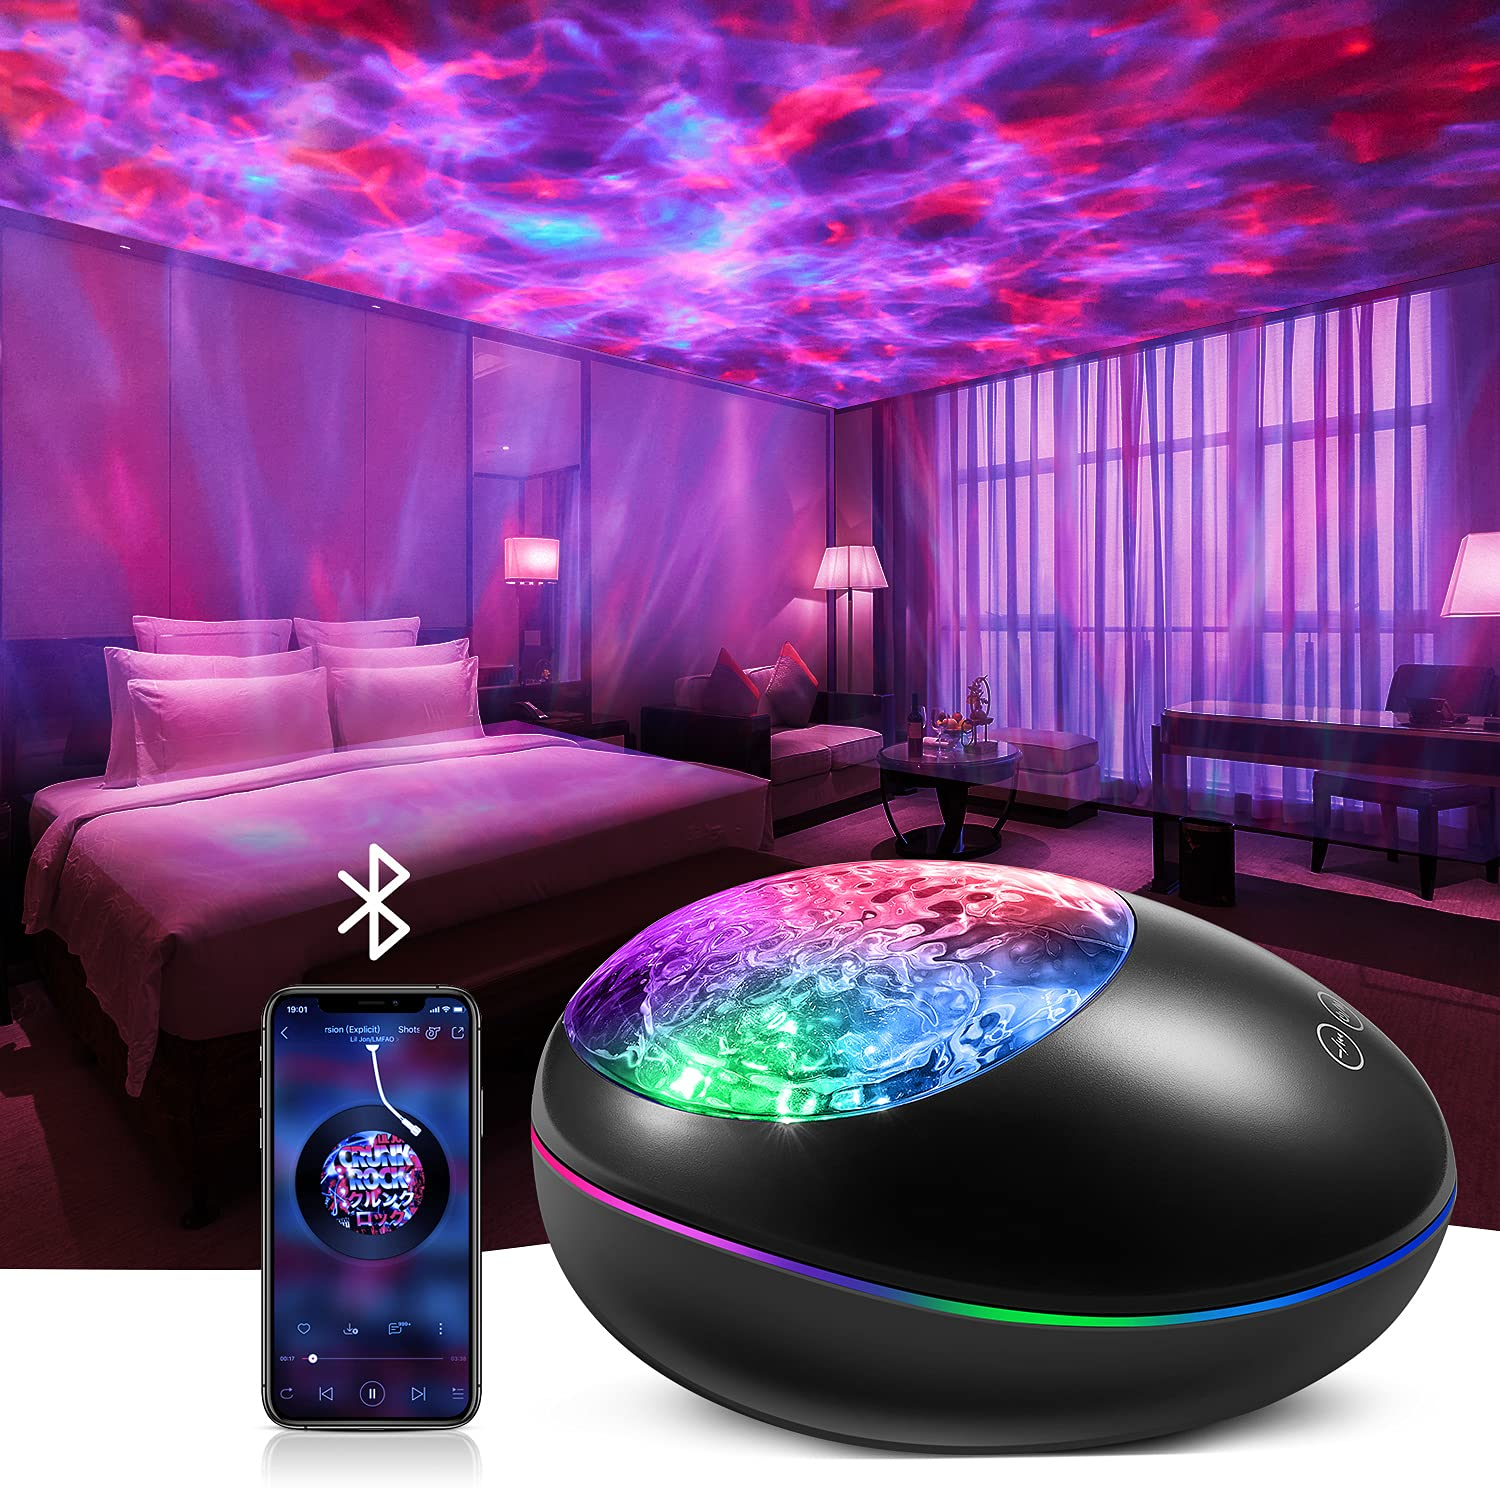 Tesoky Star Projector Night Light for Kids Rotating Ocean Wave Star Light Projector Bedroom Christmas Wedding Galaxy Light Projector with Remote Control and Bluetooth Music Speaker